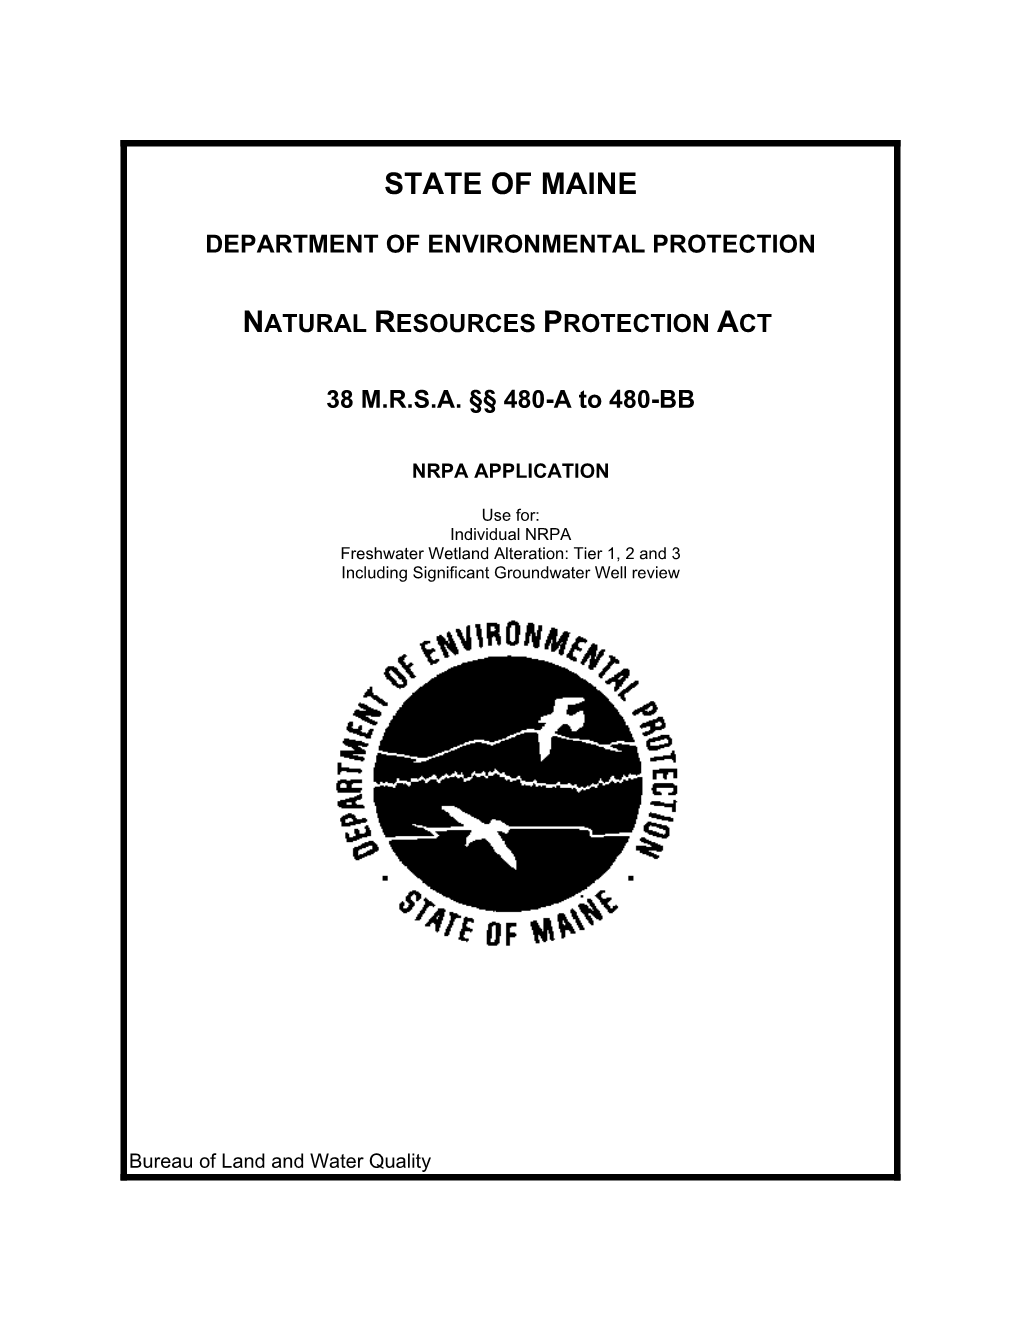 Natural Resources Protection Act